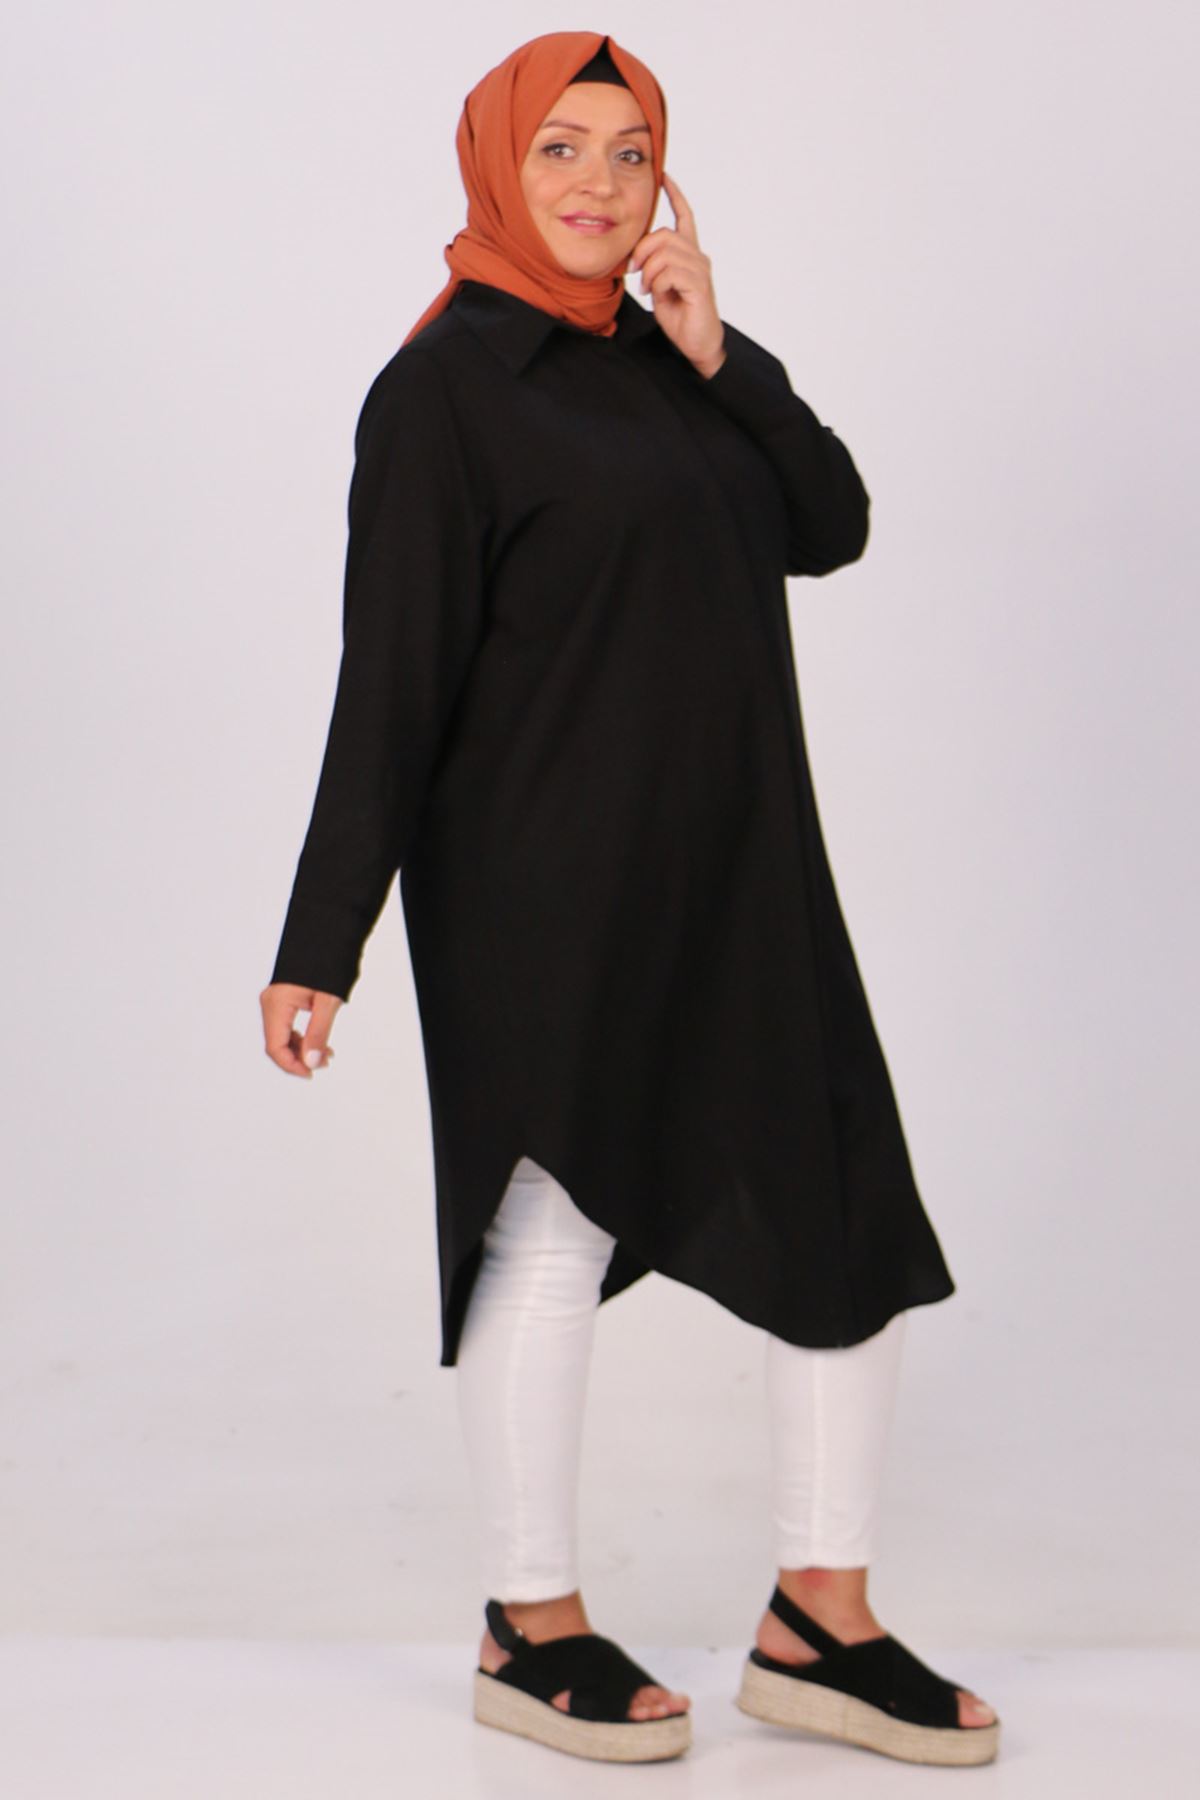 38085 Large Size Linen Shirt with Concealed Buttons - Black